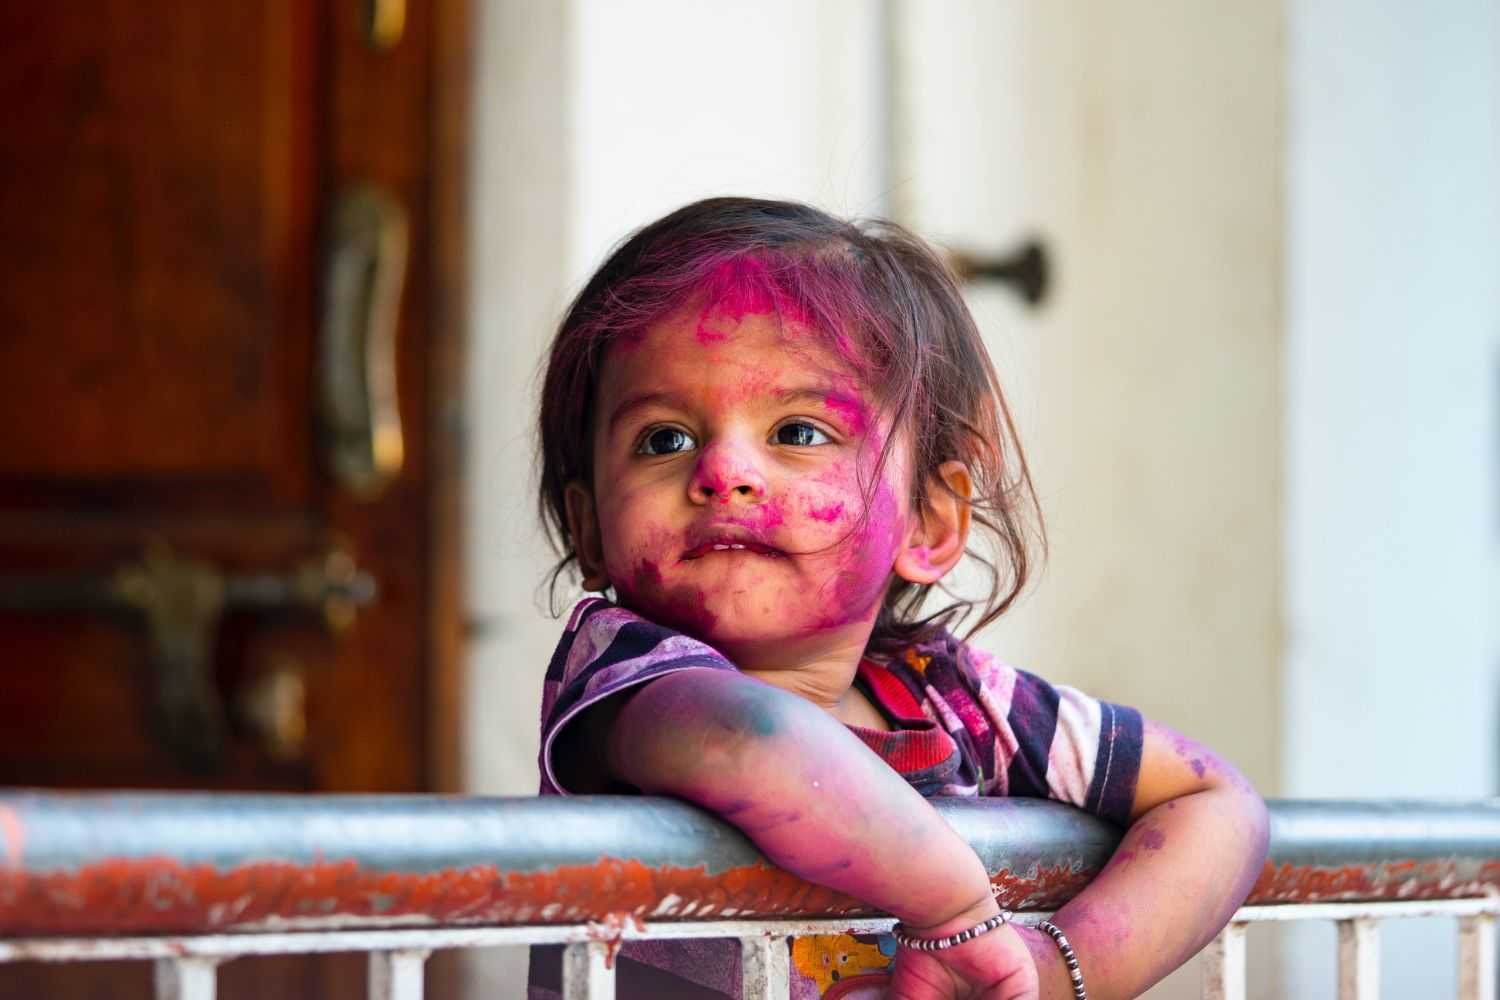 girl on holi makeup leaning on the railing